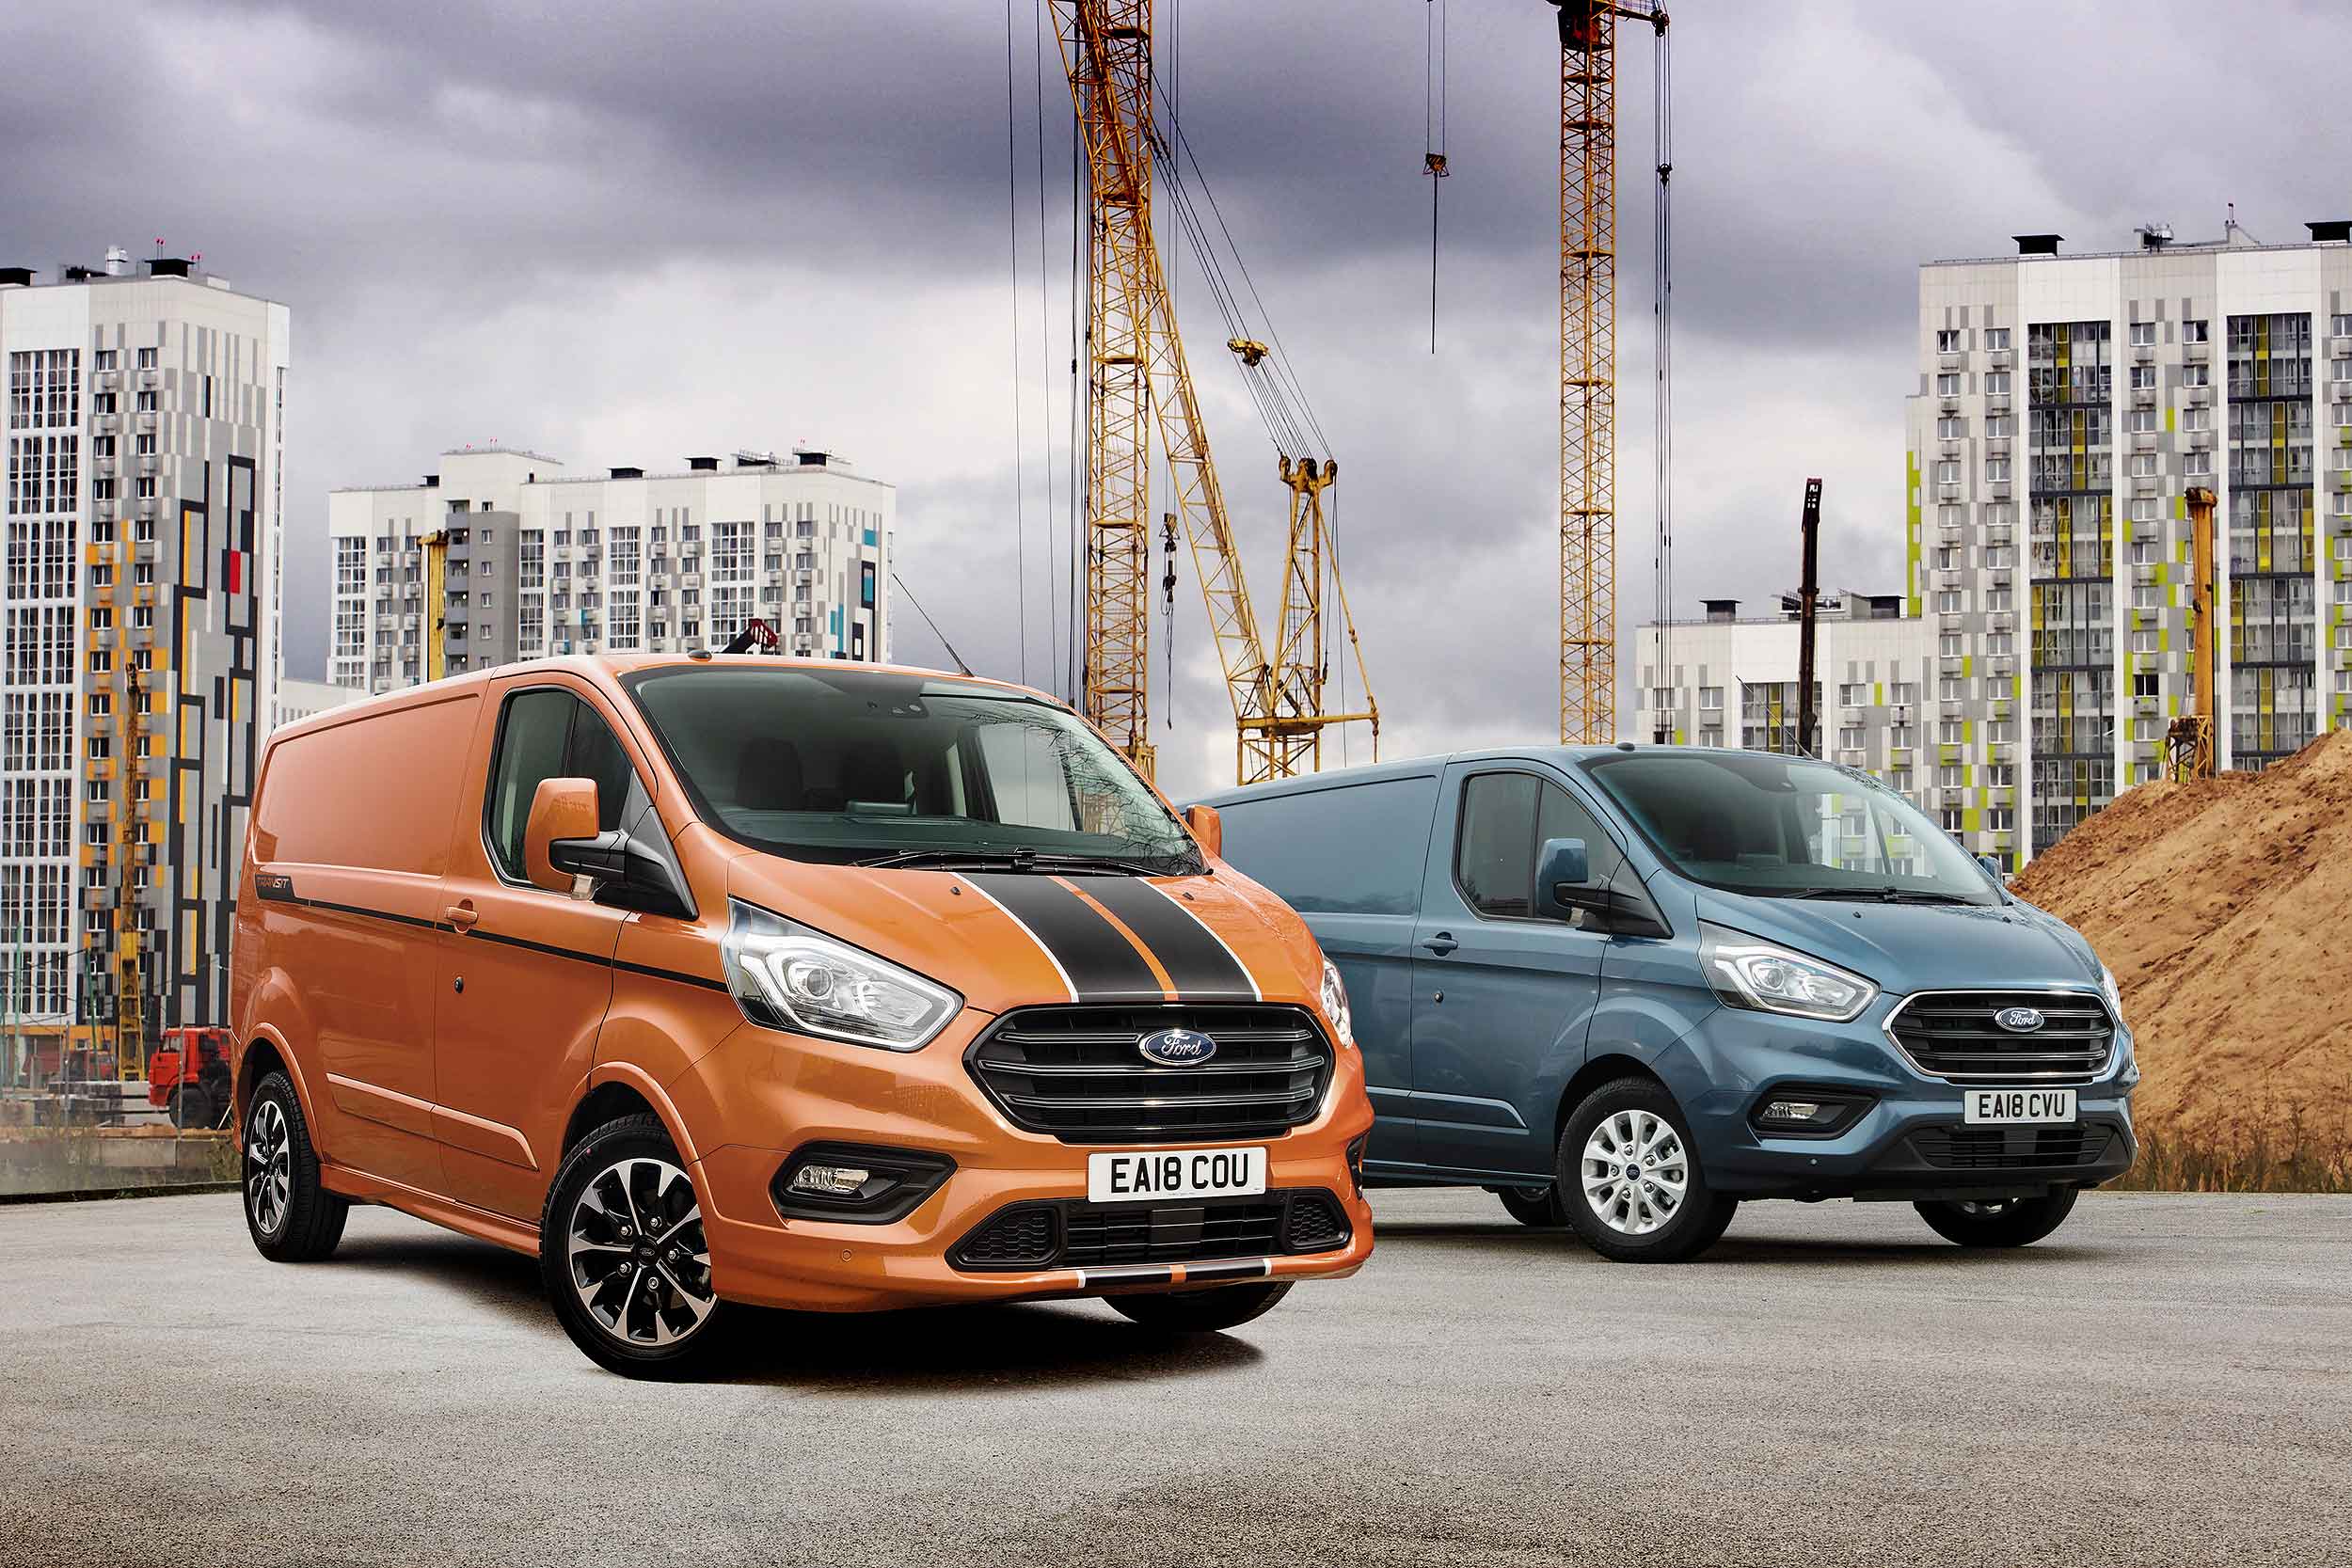 Ford Transit Custom Van Outsells Almost Every Car In October 2018